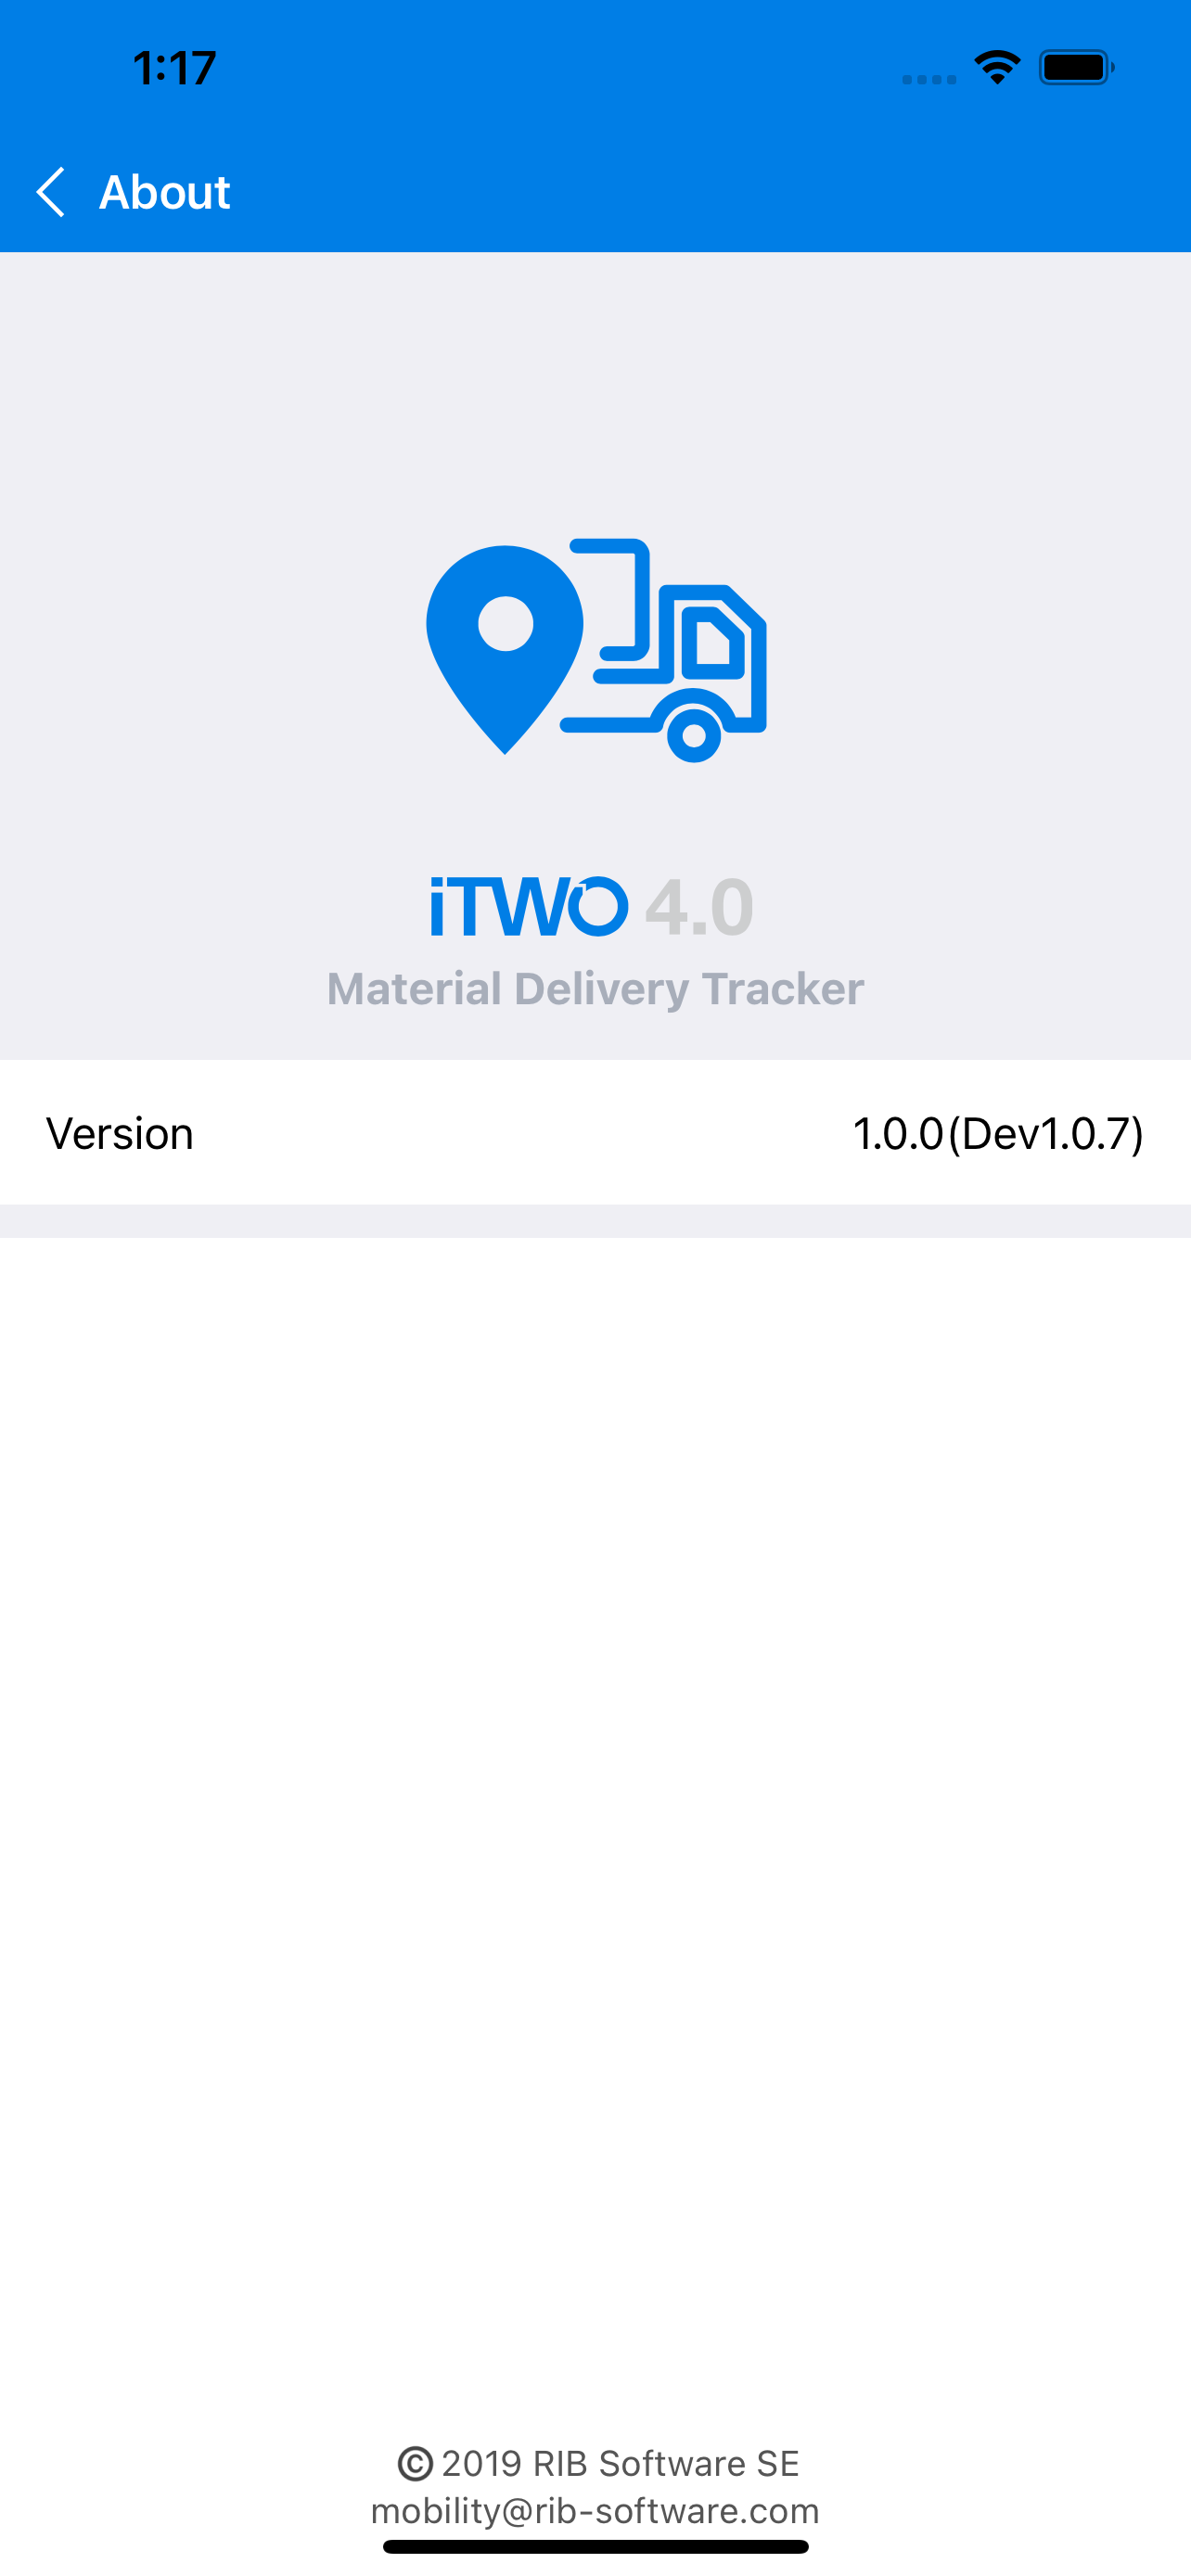 iTWO 4.0 app interface